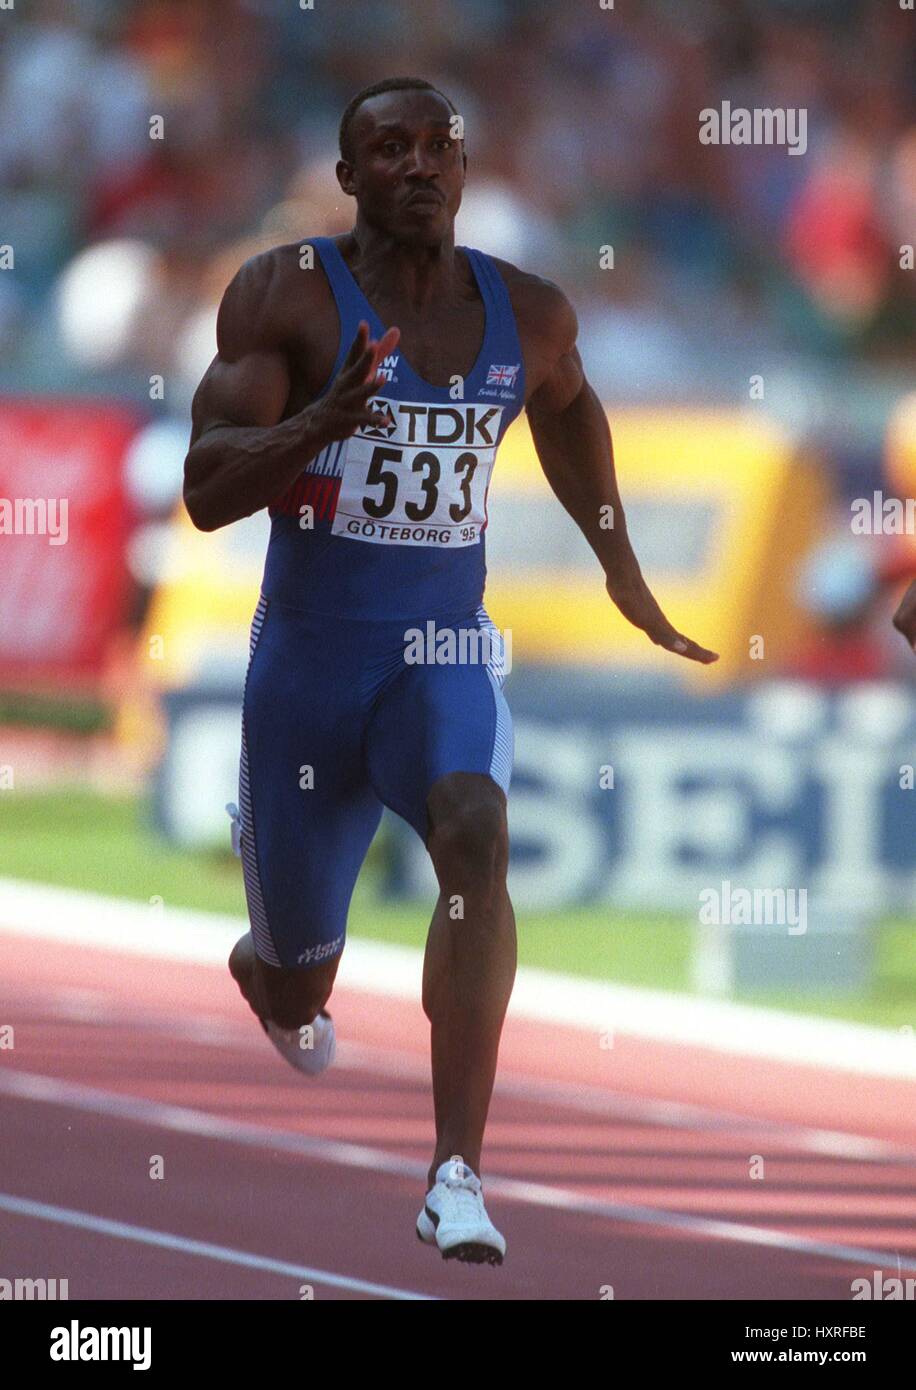 LINFORD CHRISTIE 100 METRES WORLD CHAMPS 1995 01 August 1995 Stock Photo